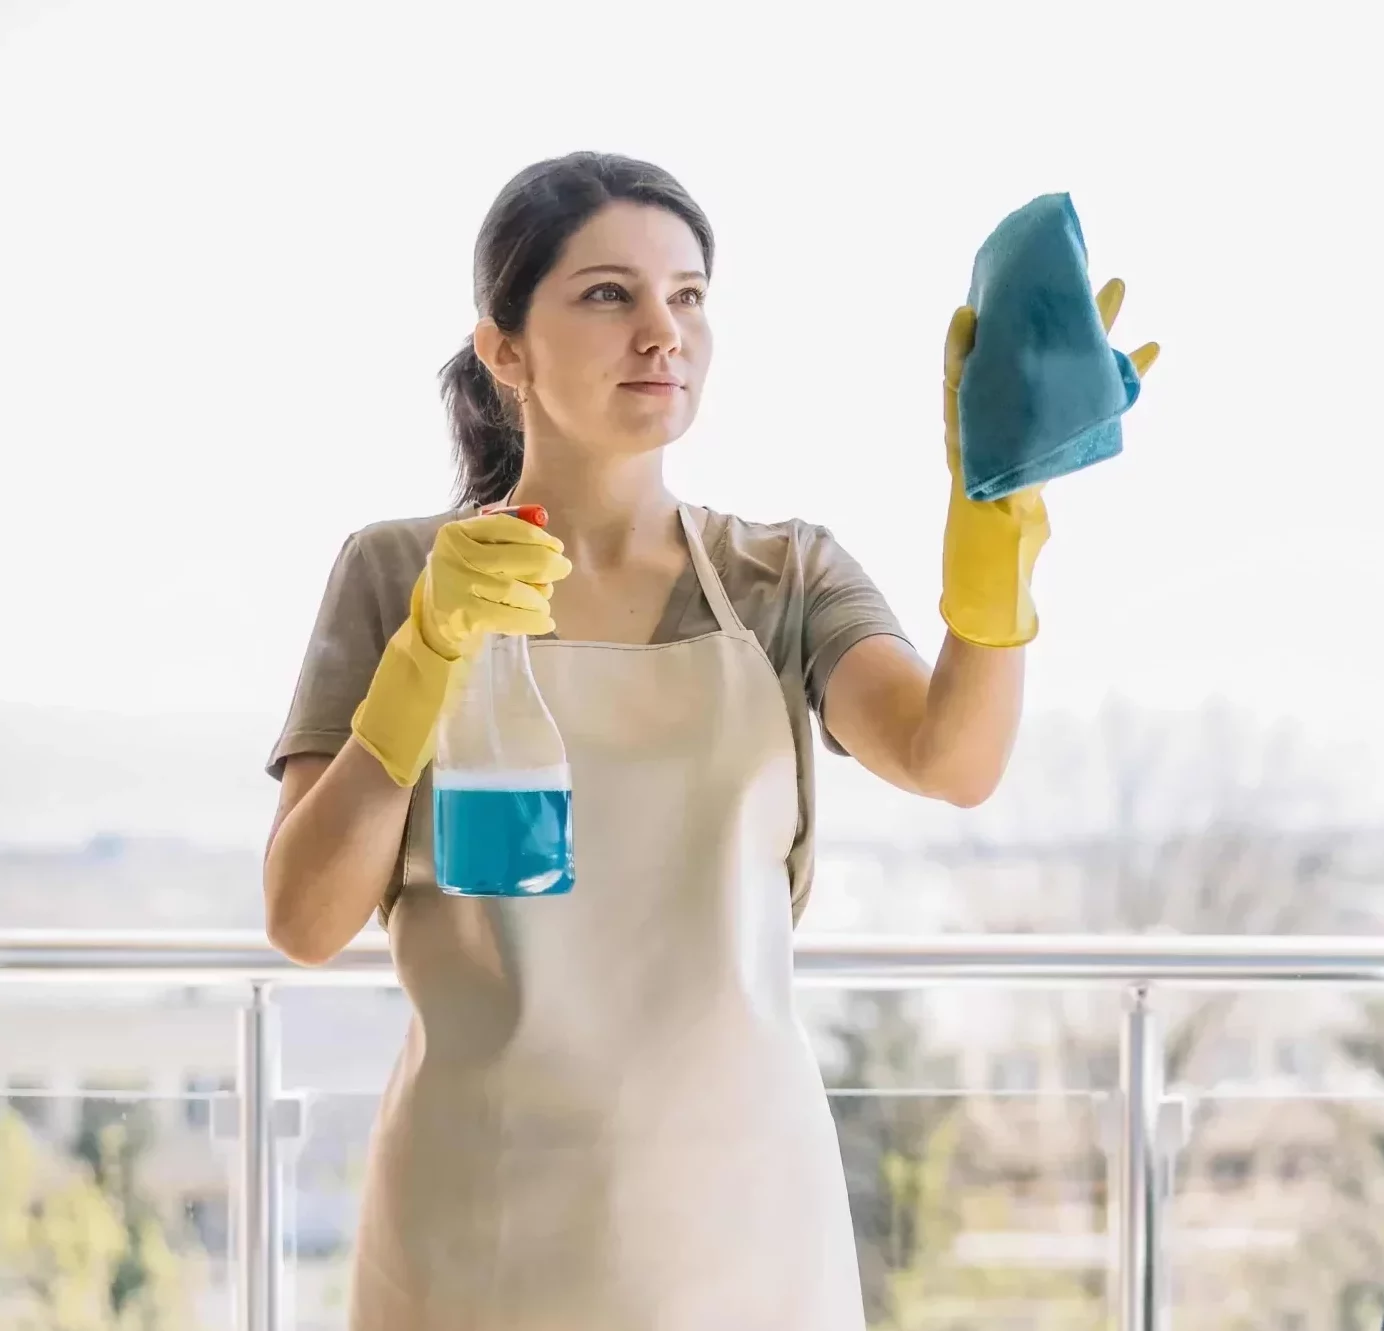 young woman cleaning the windows wearing an apron and cleaning gloves